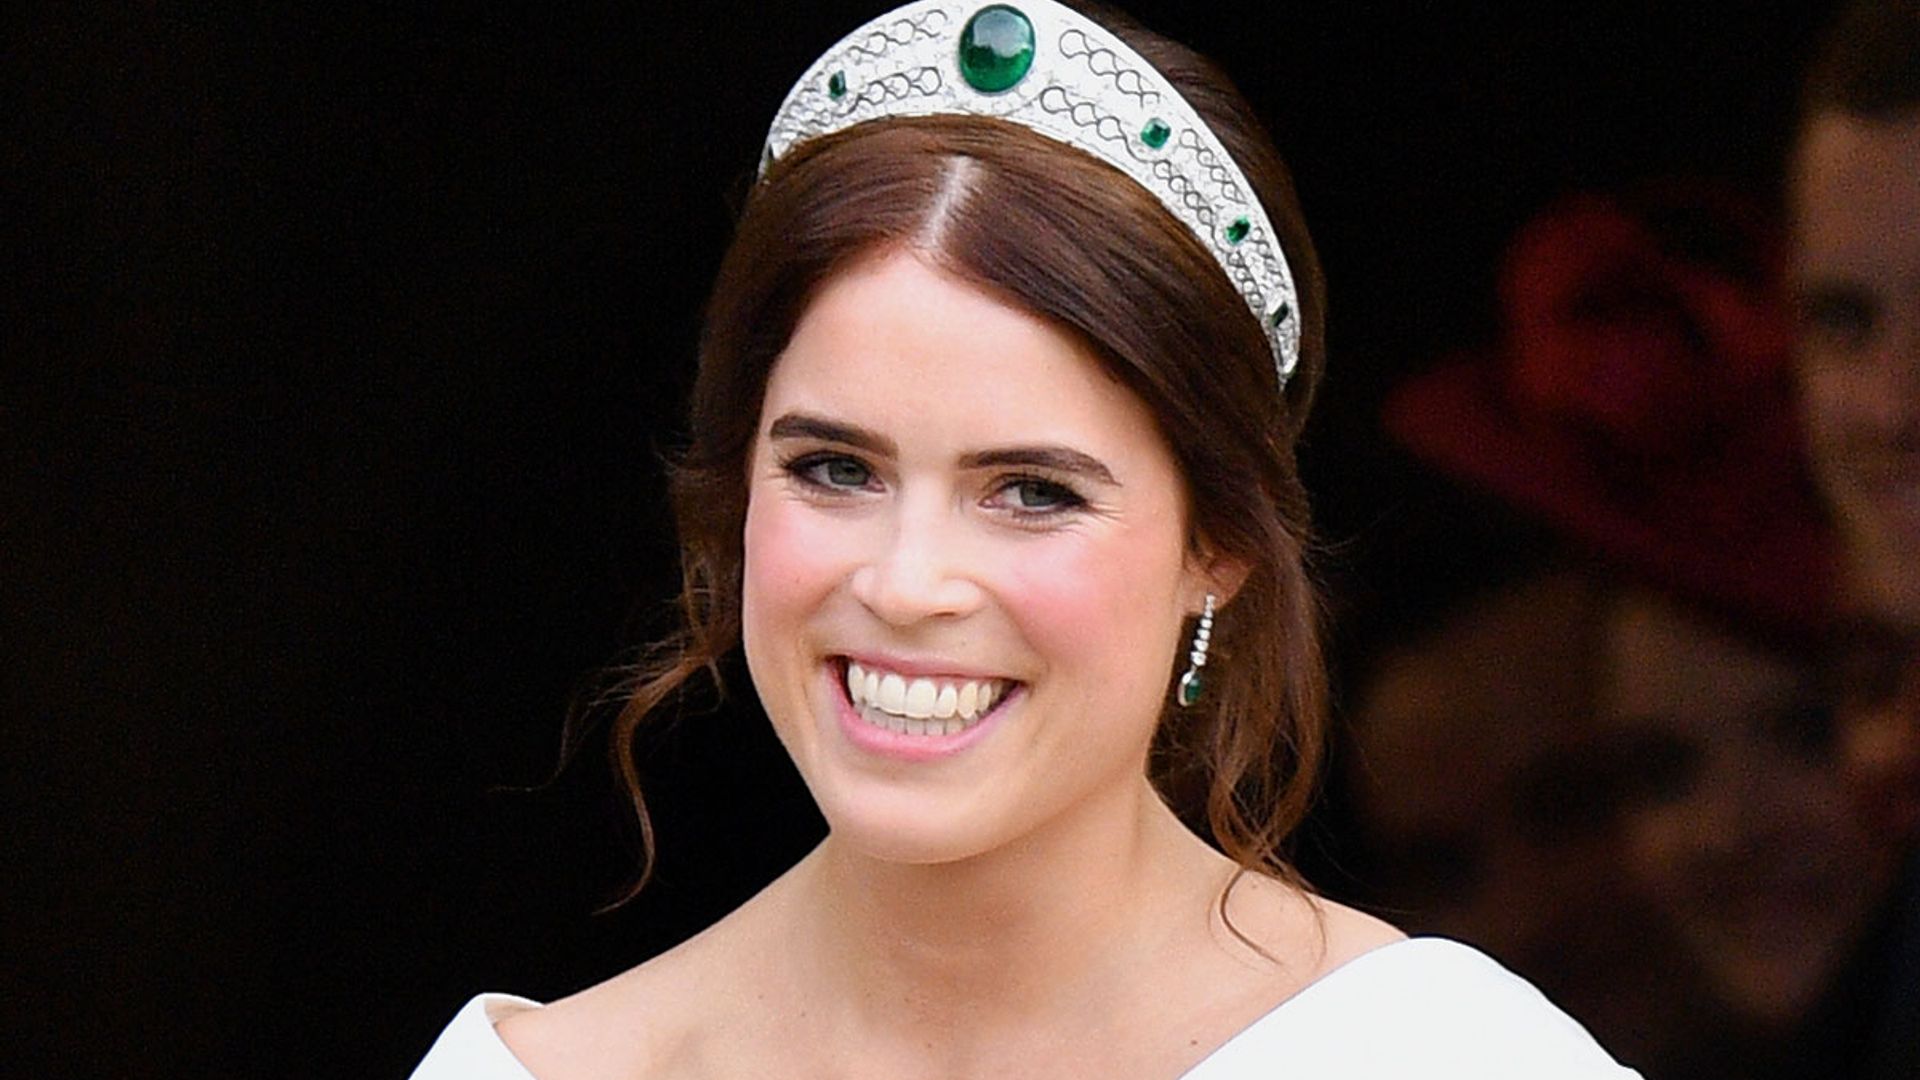 Princess Eugenie's makeup artist Hannah Martin shares genius beauty tips for mums on-the-go